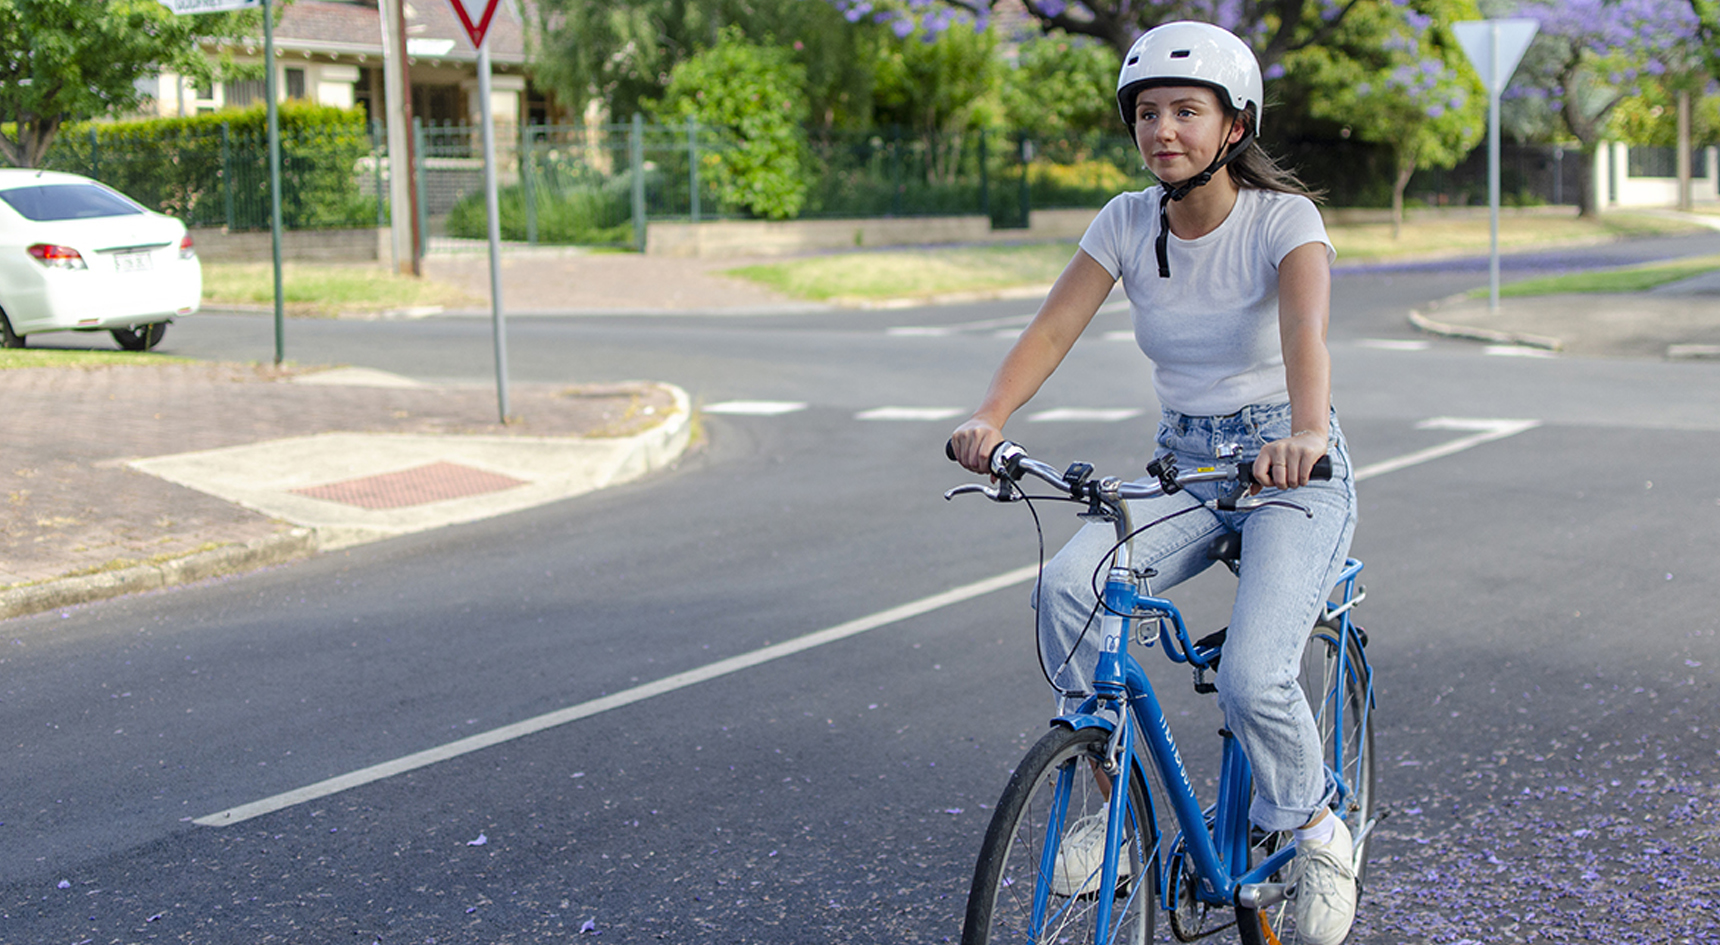 A lady riding down the road on her bike wearing a helmet.